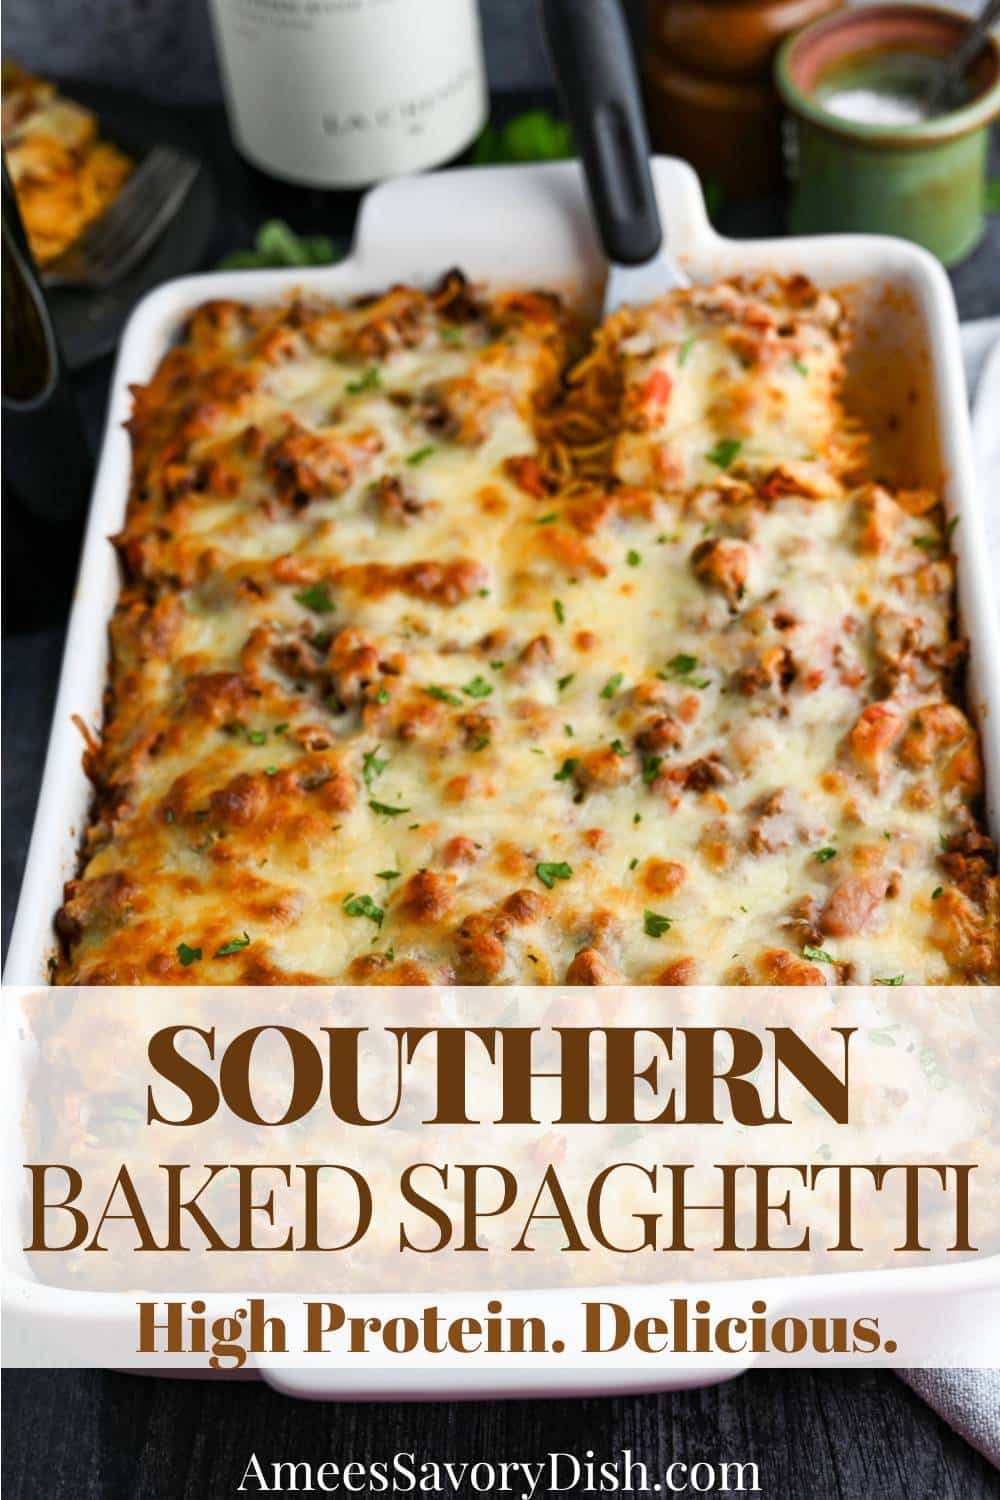 This Southern Baked Spaghetti Casserole is a crowd-pleasing, high-protein pasta bake. Perfect for family gatherings, meal prep, and make-ahead freezer meals. via @Ameessavorydish